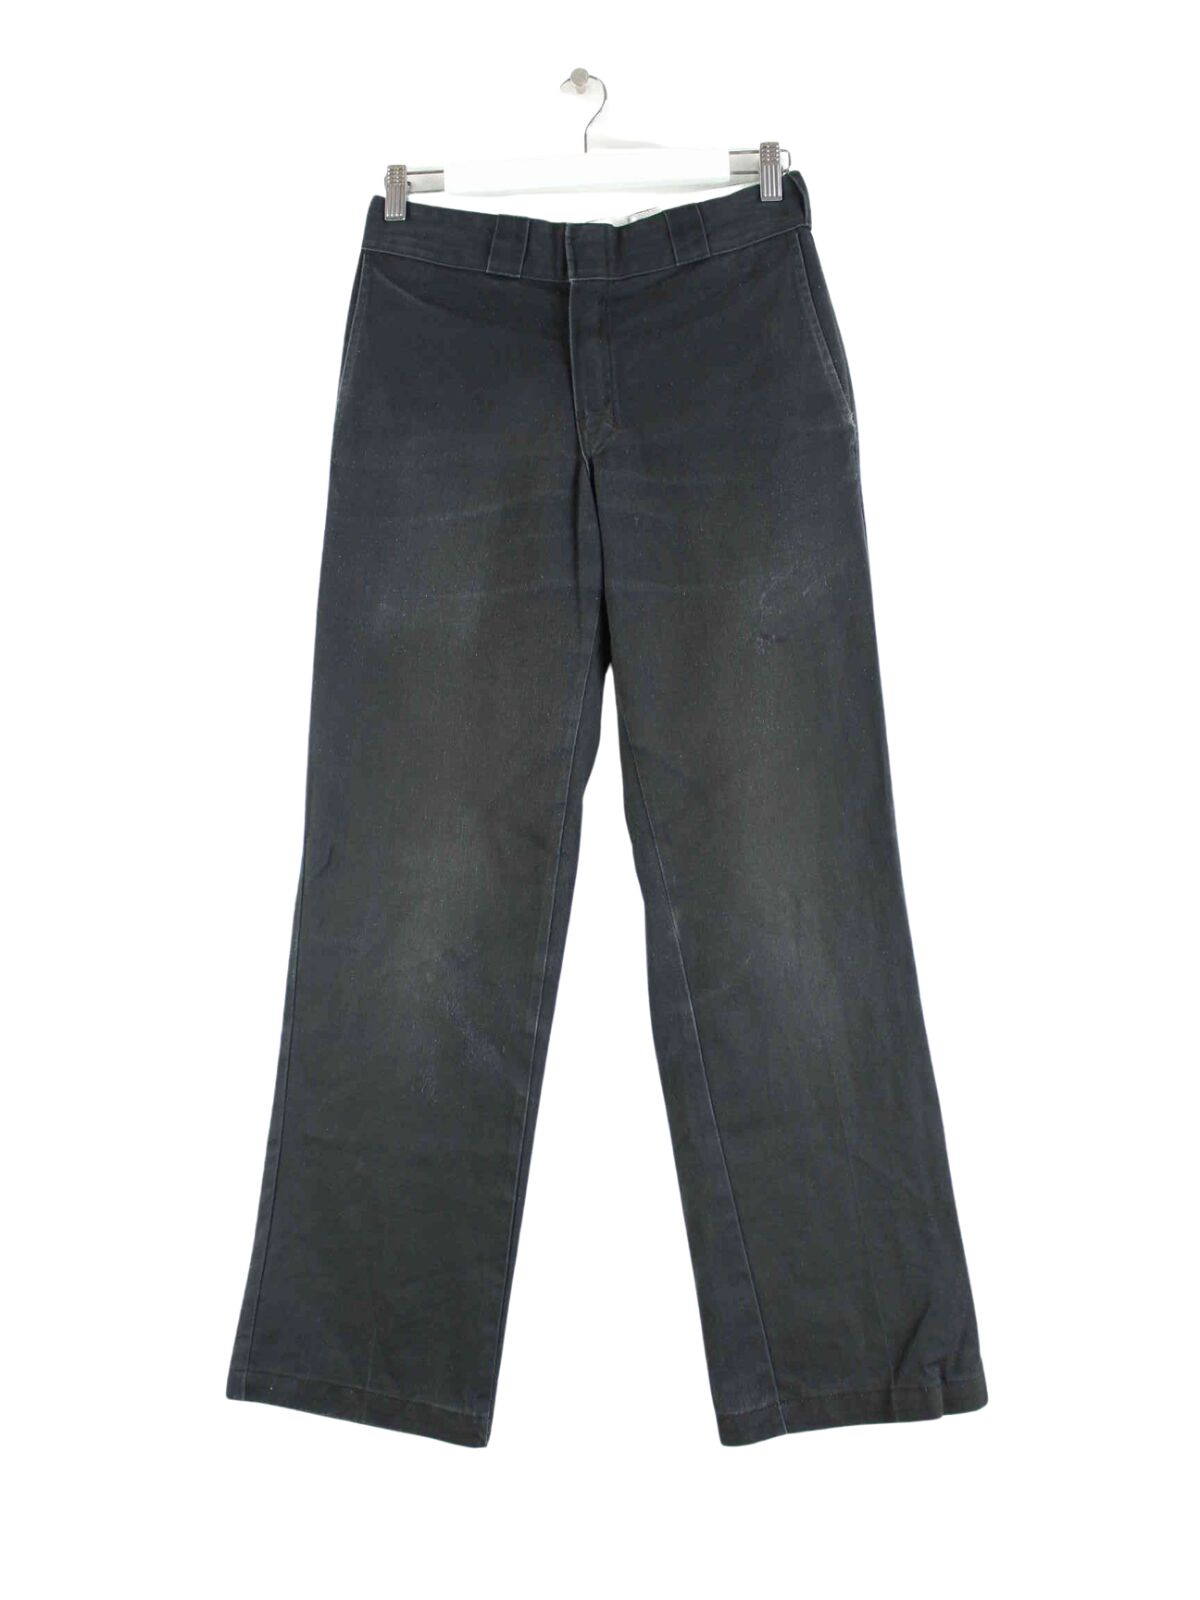 Dickies Chino Hose Schwarz W25 L30 (front image)